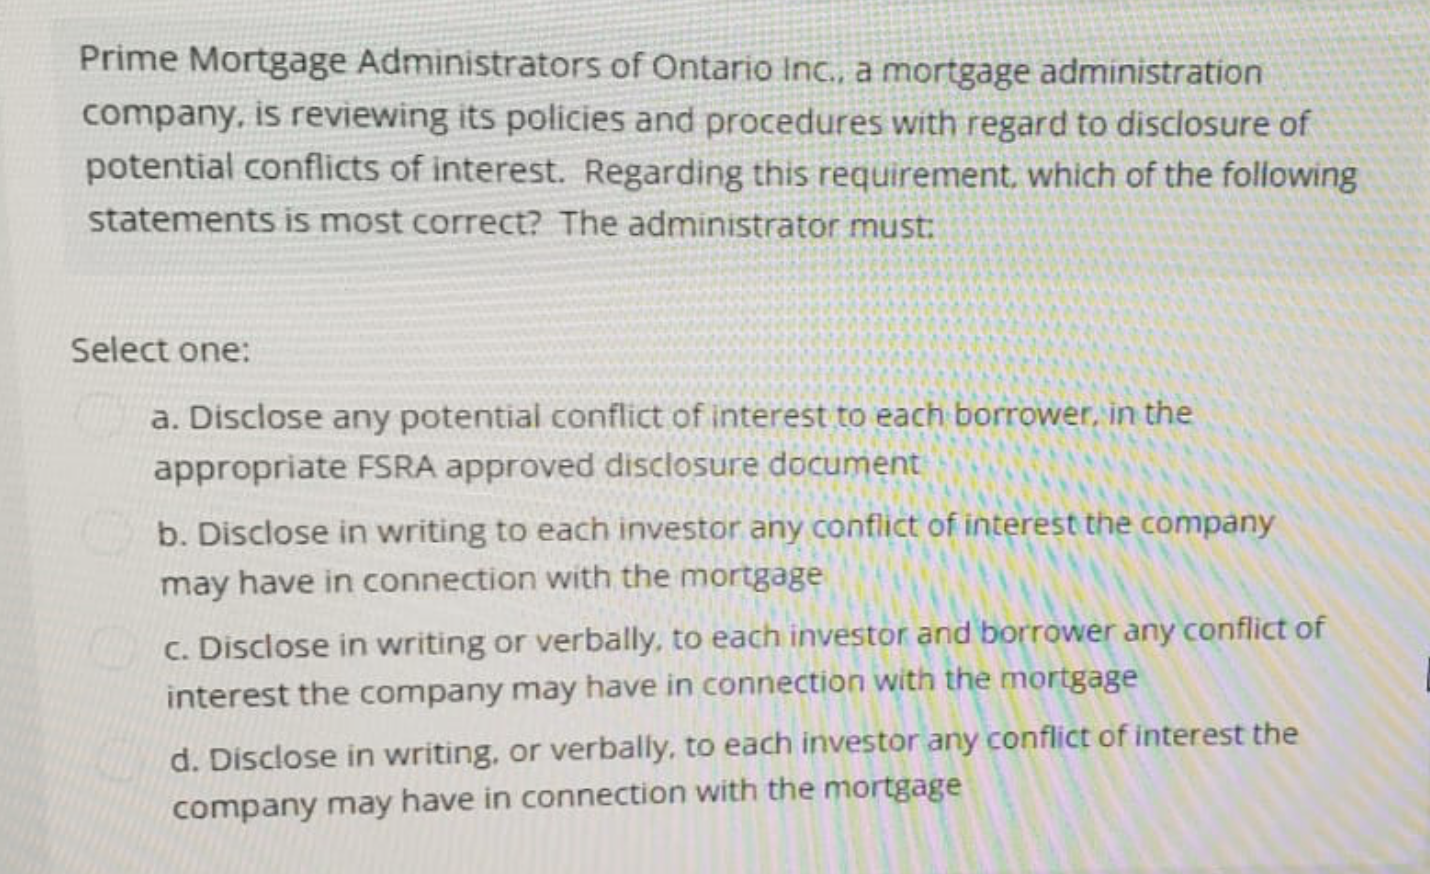 Prime Mortgage Administrators of Ontario Inc., a mortgage administration
company, is reviewing its policies and procedures with regard to disclosure of
potential conflicts of interest. Regarding this requirement, which of the following
statements is most correct? The administrator must:
Select one:
a. Disclose any potential conflict of interest to each borrower, in the
appropriate FSRA approved disclosure document
b. Disclose in writing to each investor any conflict of interest the company
may have in connection with the mortgage
c. Disclose in writing or verbally, to each investor and borrower any conflict of
interest the company may have in connection with the mortgage
d. Disclose in writing, or verbally, to each investor any conflict of interest the
company may have in connection with the mortgage